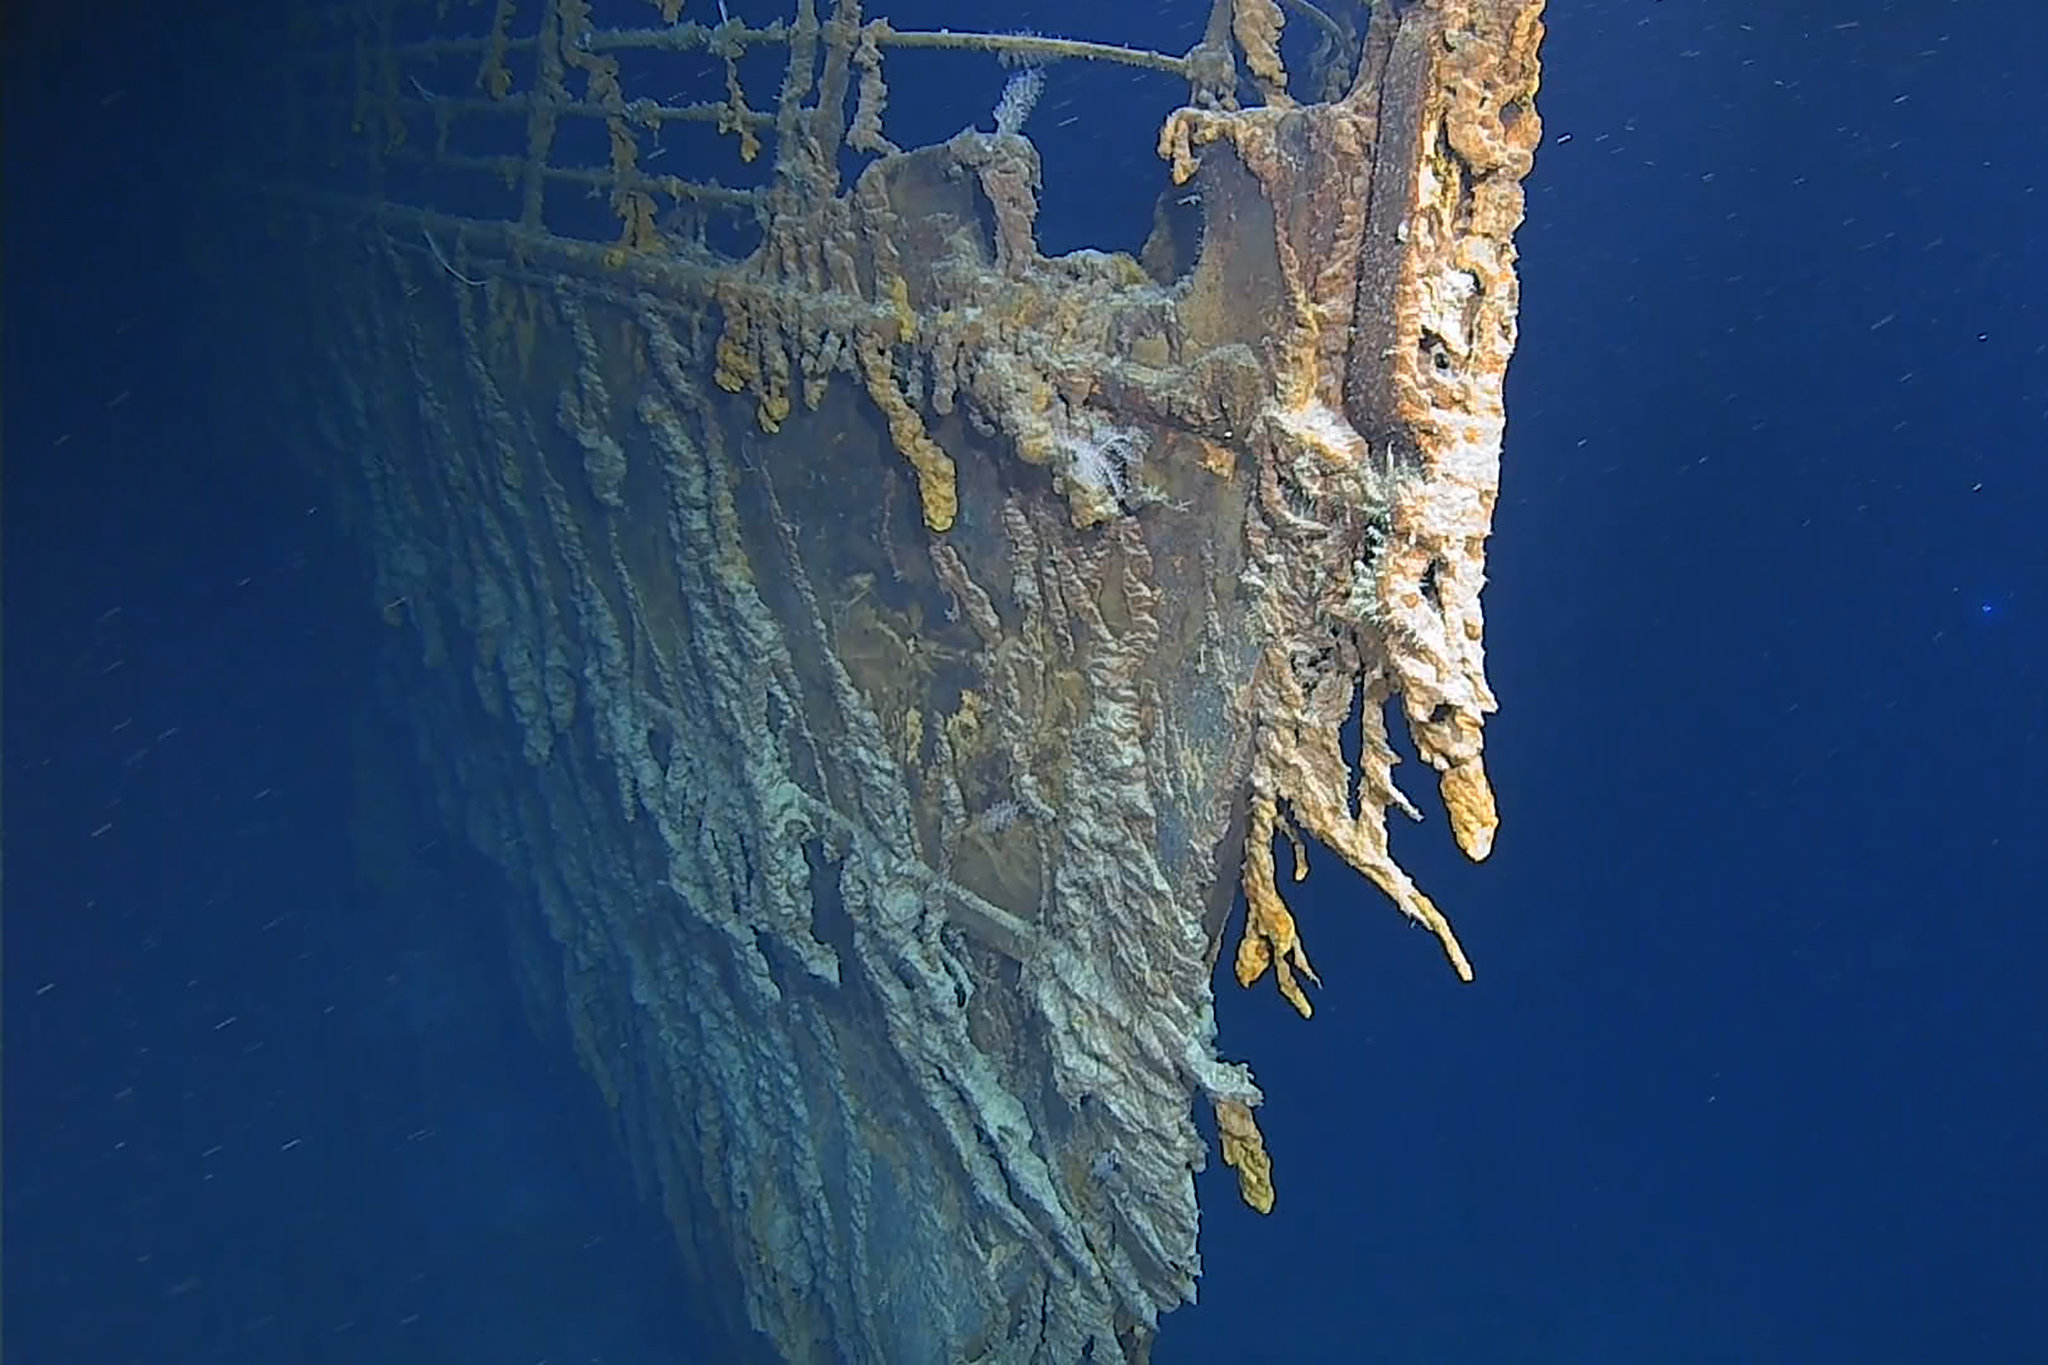 2048x1365 Where the Titanic Shipwreck Rests, New Photos Reveal Extensive Decay The New York Times